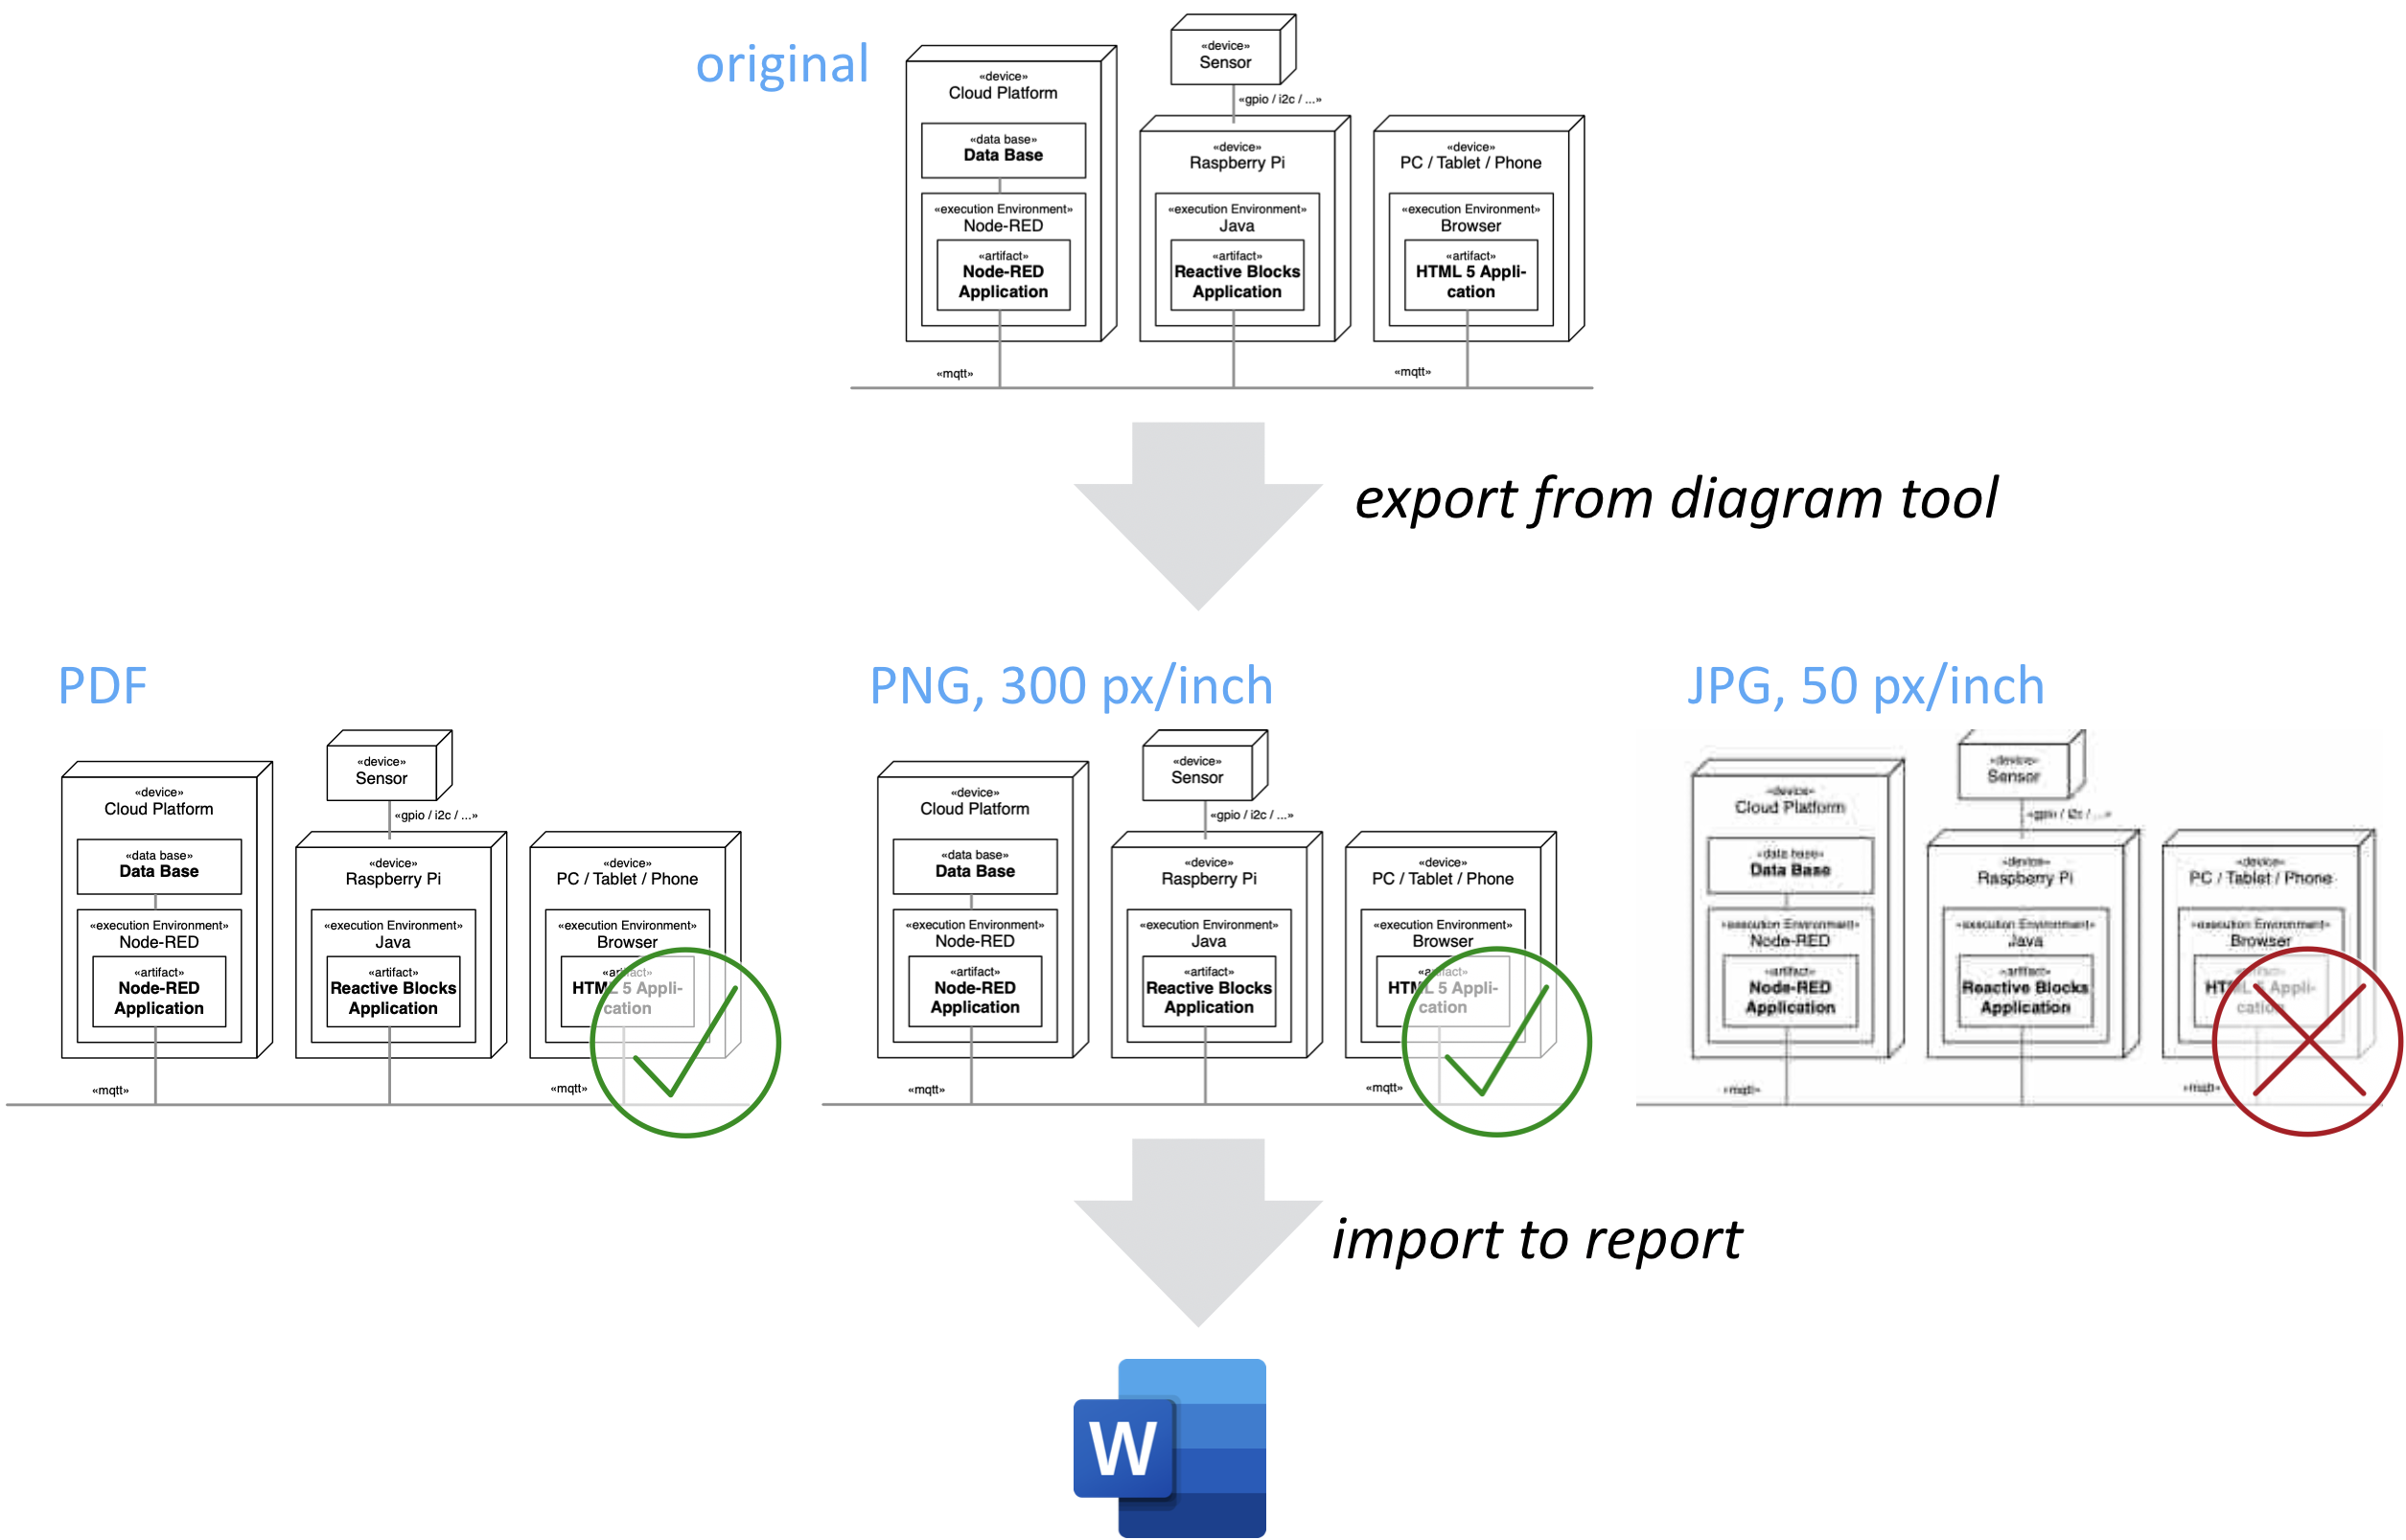 Prefer PDF as conversion format when importing diagrams into Word to avoid blurred diagrams.